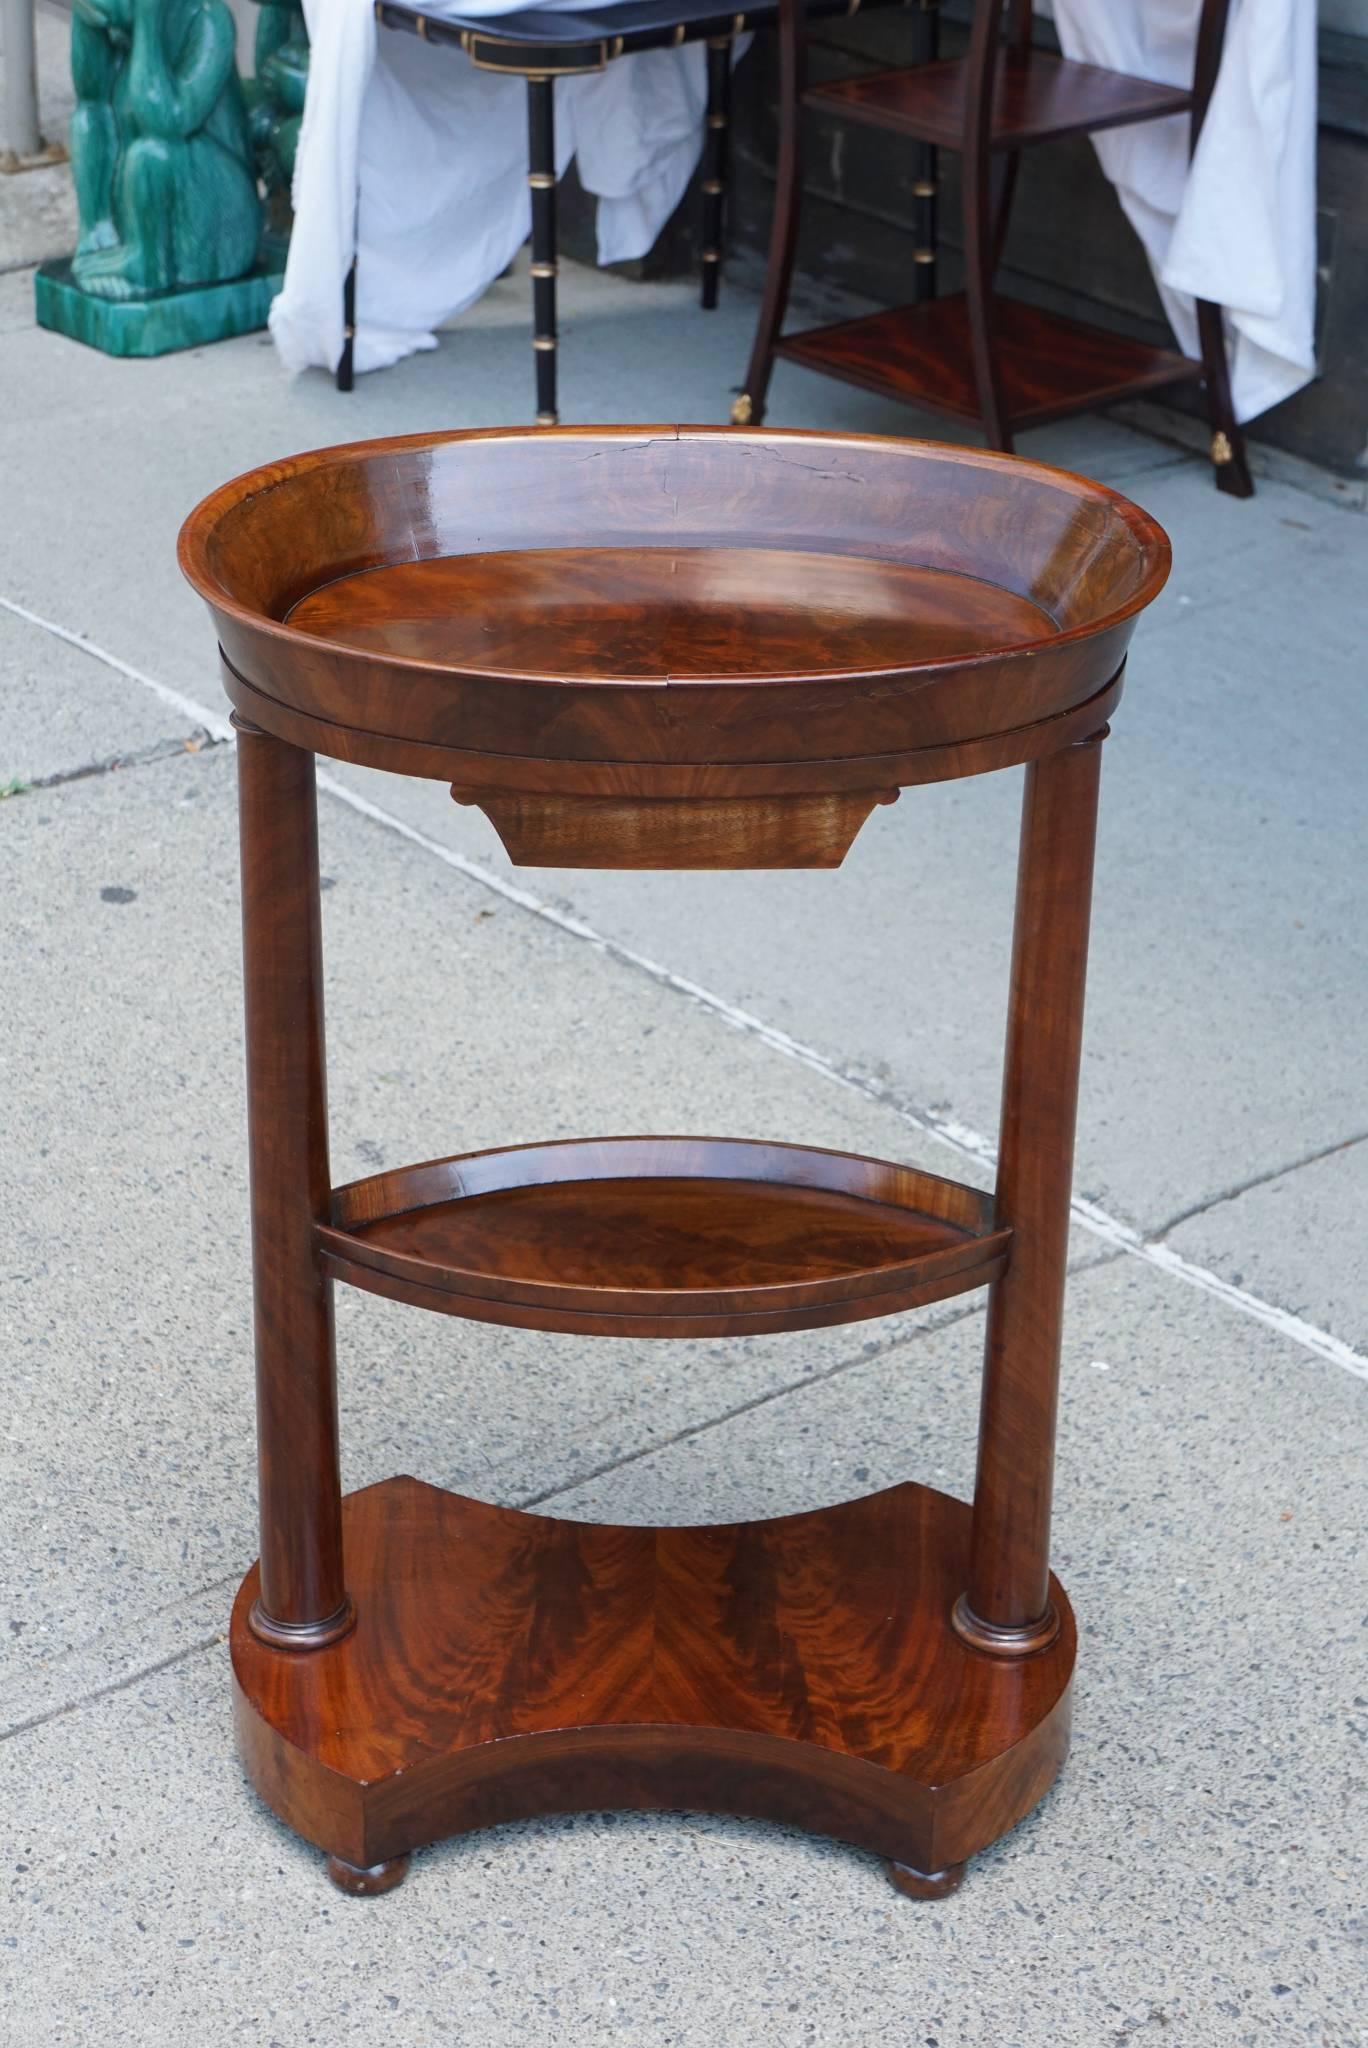 This table made in expensive imported mahogany was made in France, circa 1820. Stylish in an Empire form but in a then new easy less formulaic way showing the end of the countries need to dominate the continent. It's light airy form is playful with